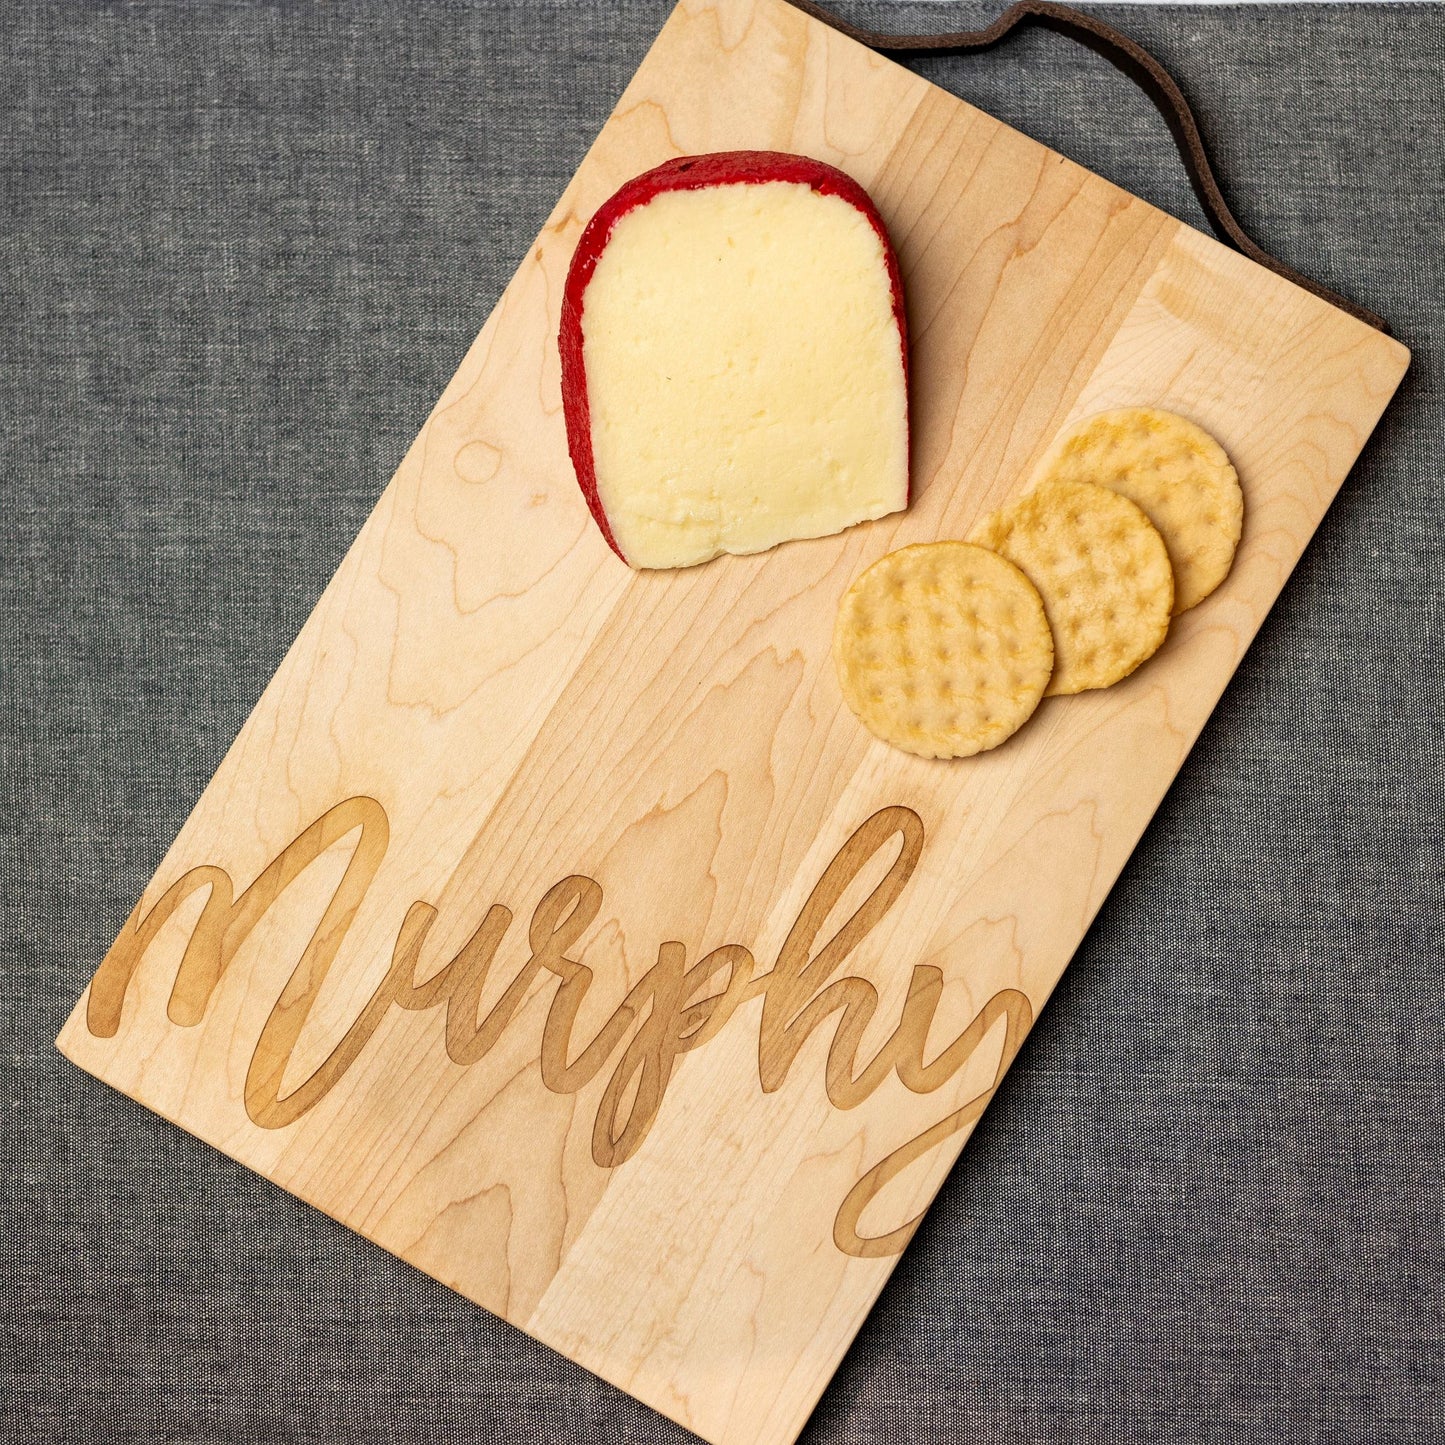 Personalized Serving Board w/Leather Handle